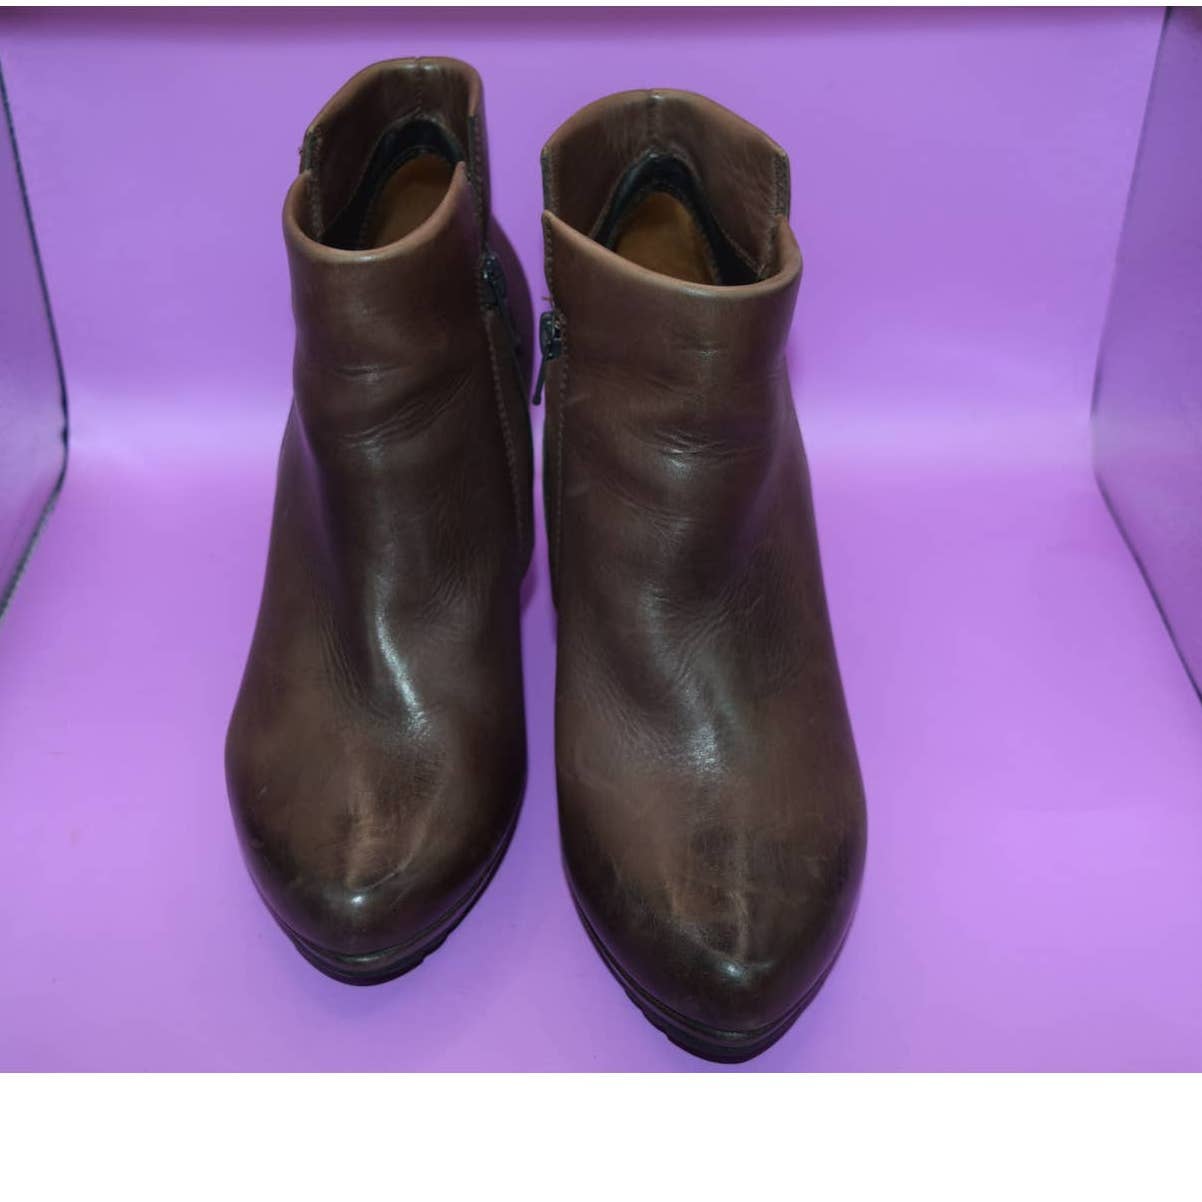 Paul Green Brown Leather Heeled Ankle Boots - 4.5